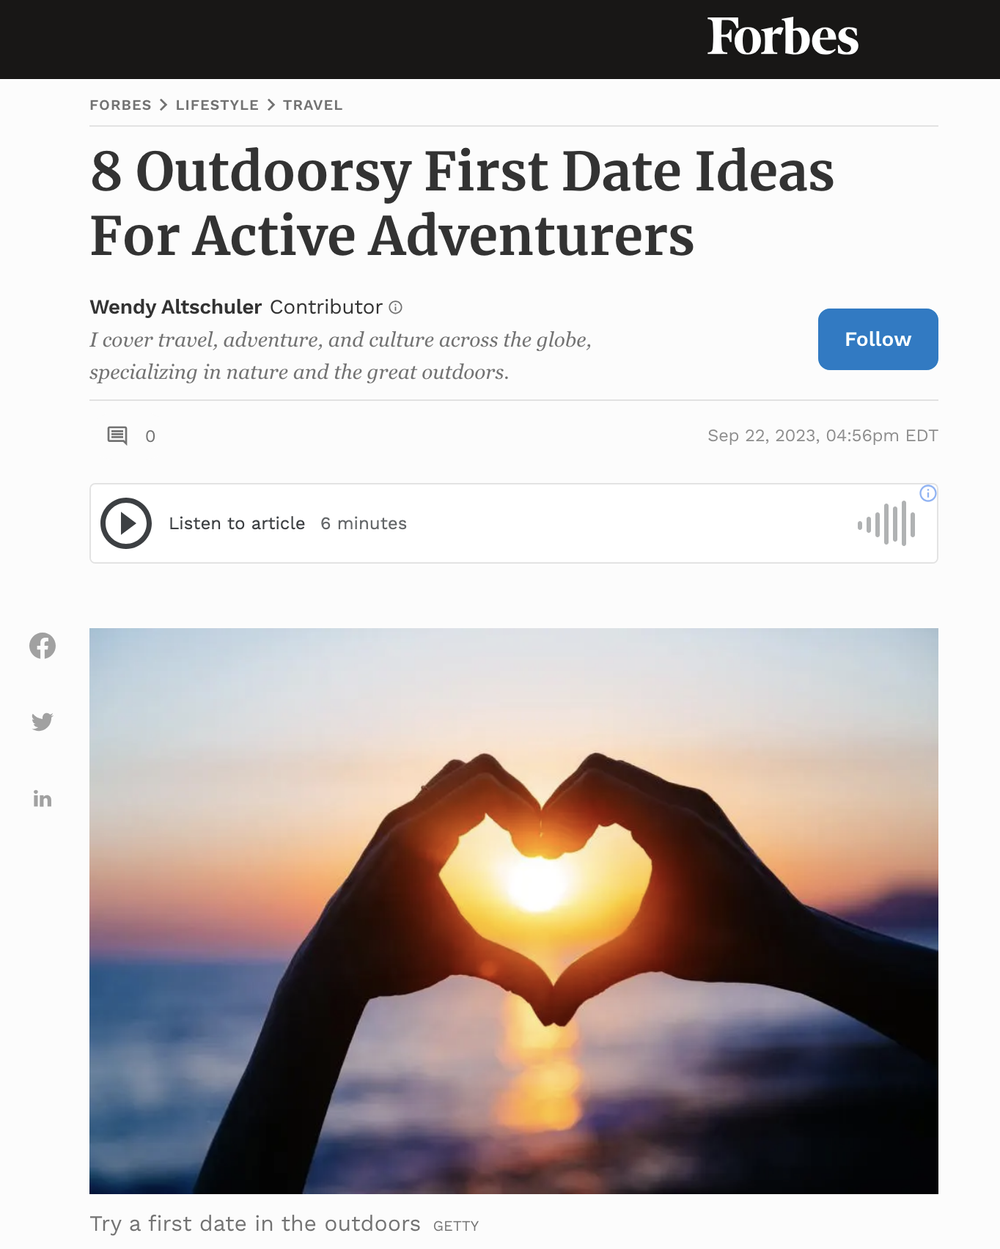 8 Outdoorsy First Date Ideas For Active Adventurers